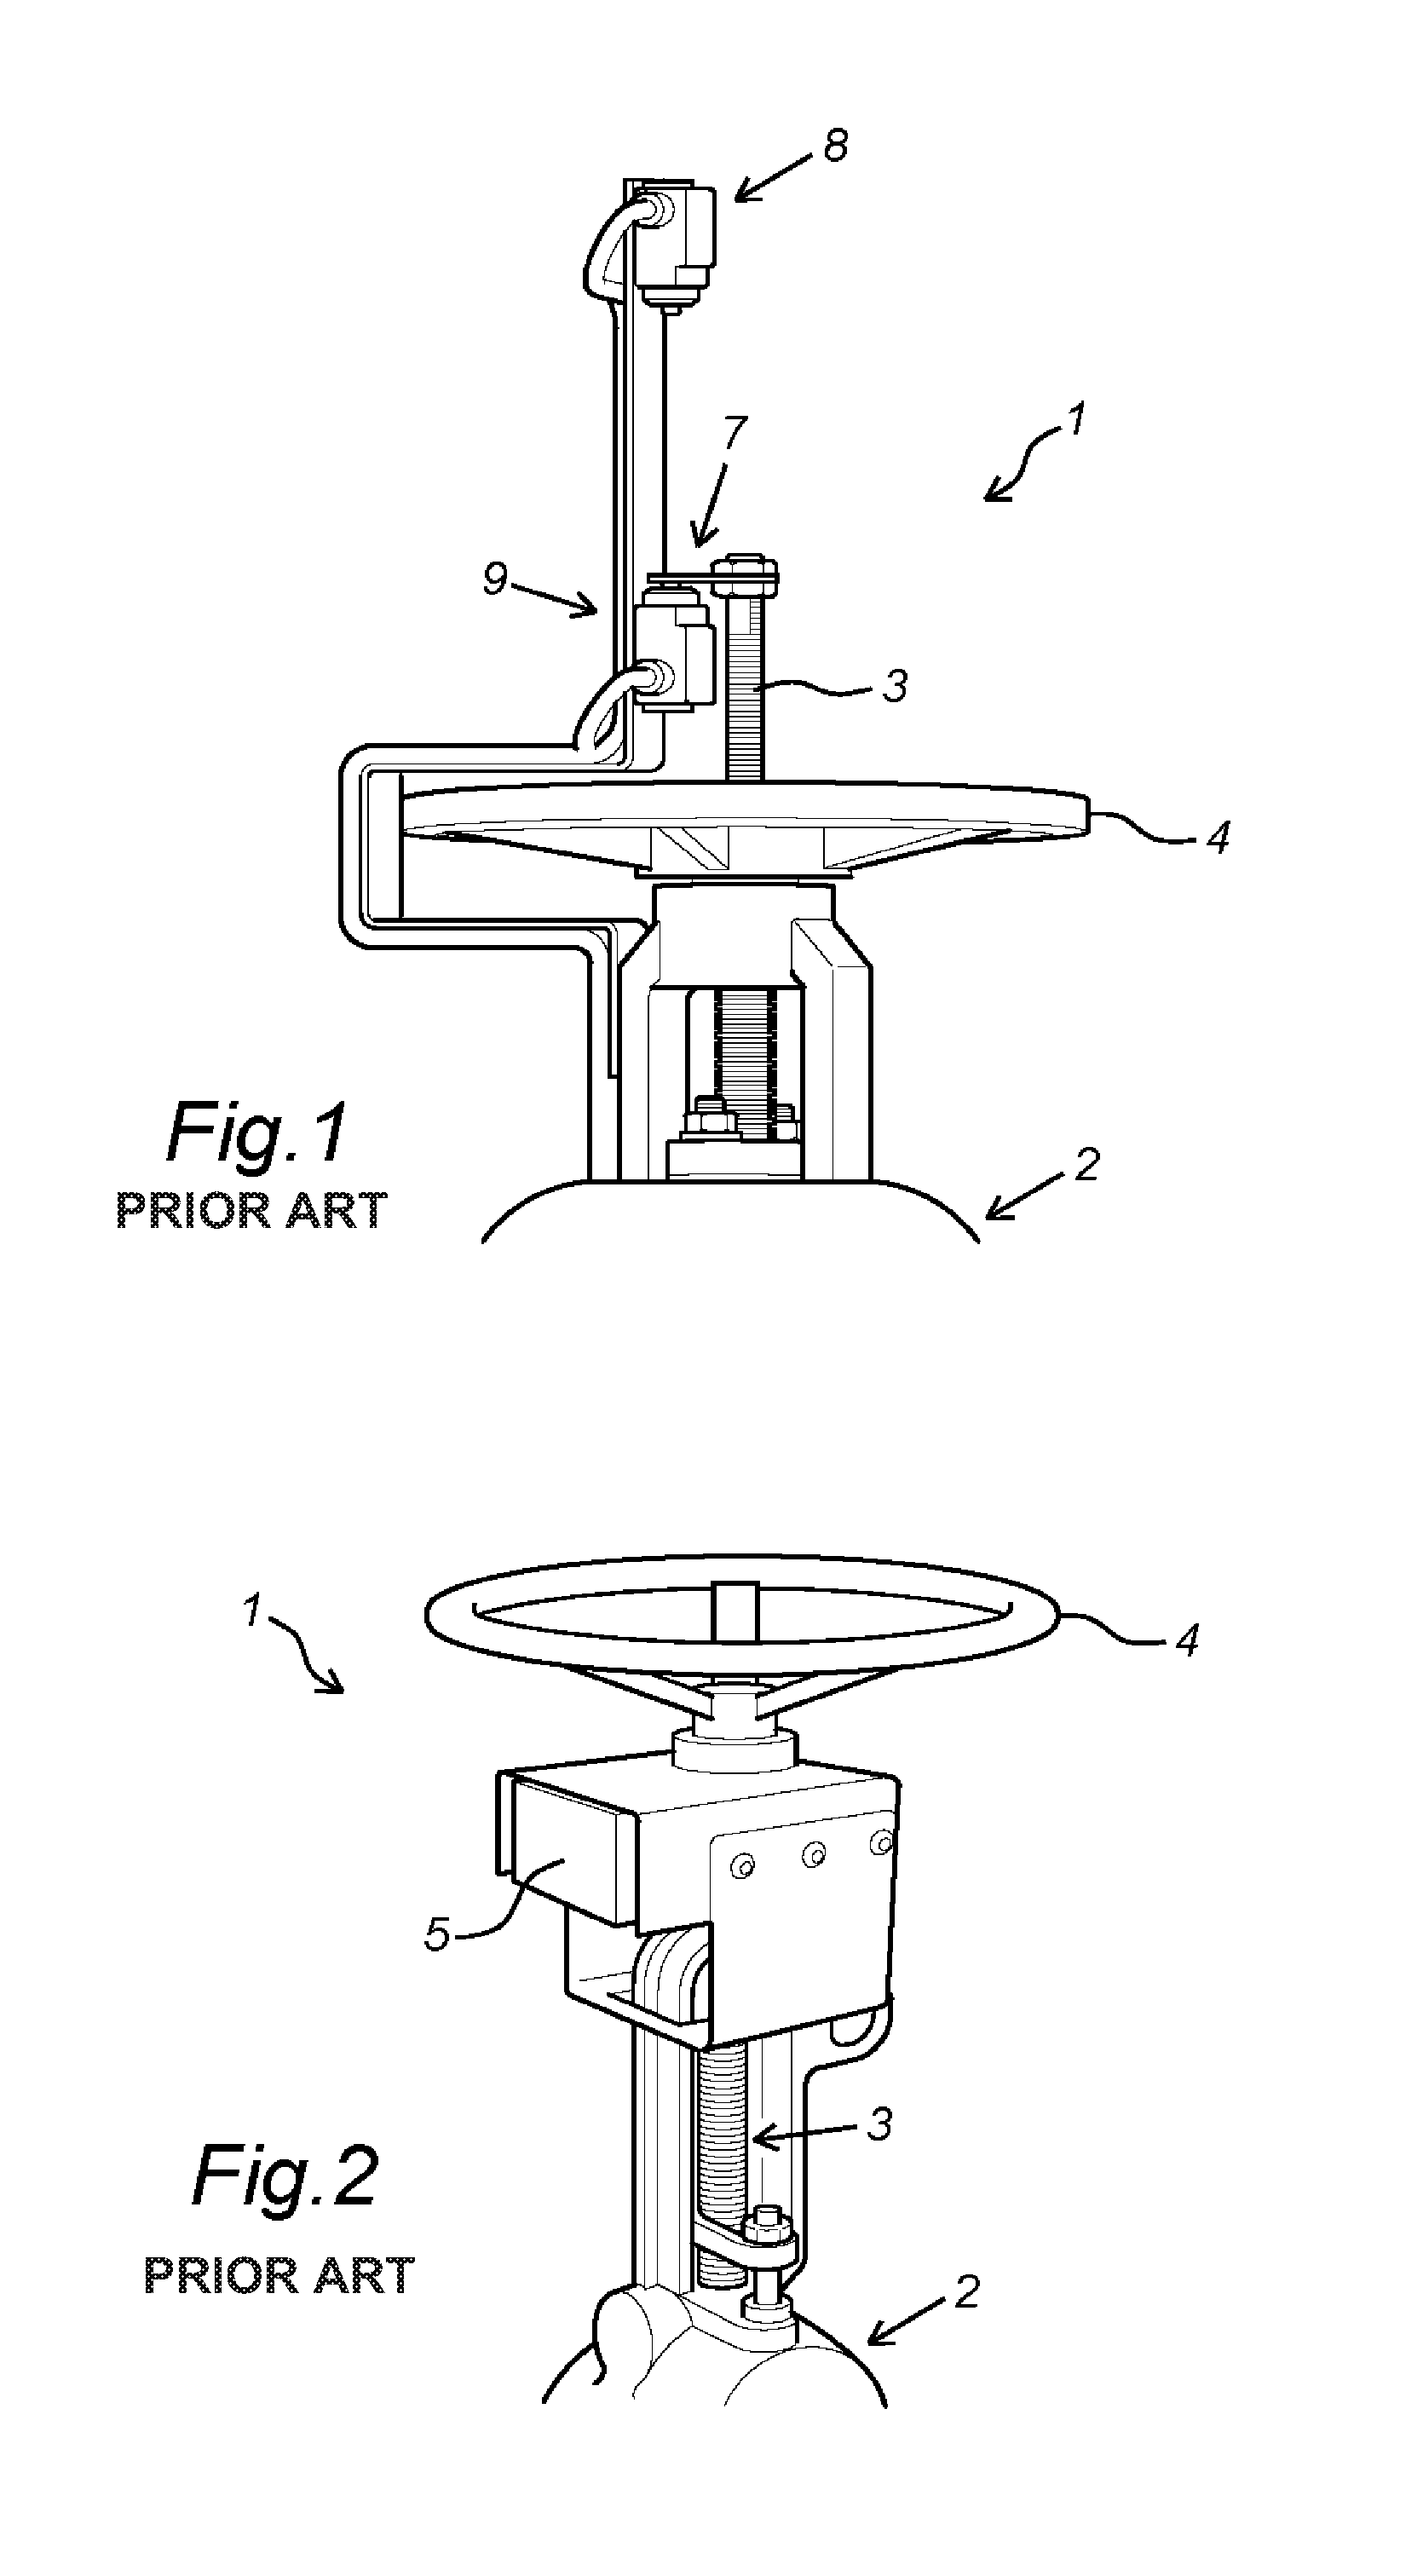 Valve position indicator and a method for indicating a valve position